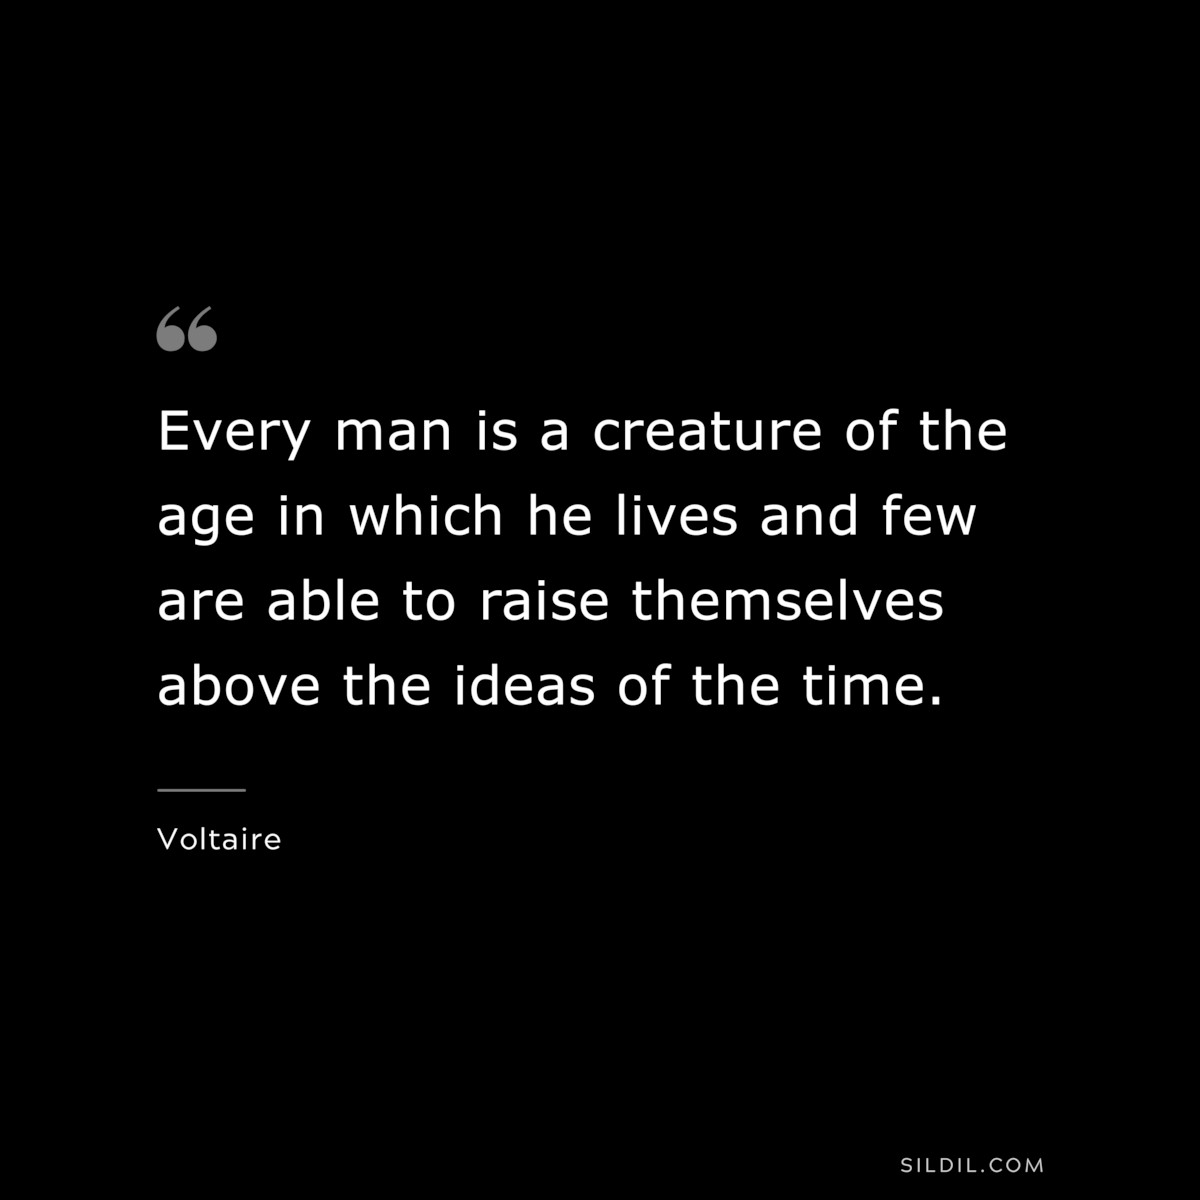 Every man is a creature of the age in which he lives and few are able to raise themselves above the ideas of the time. ― Voltaire